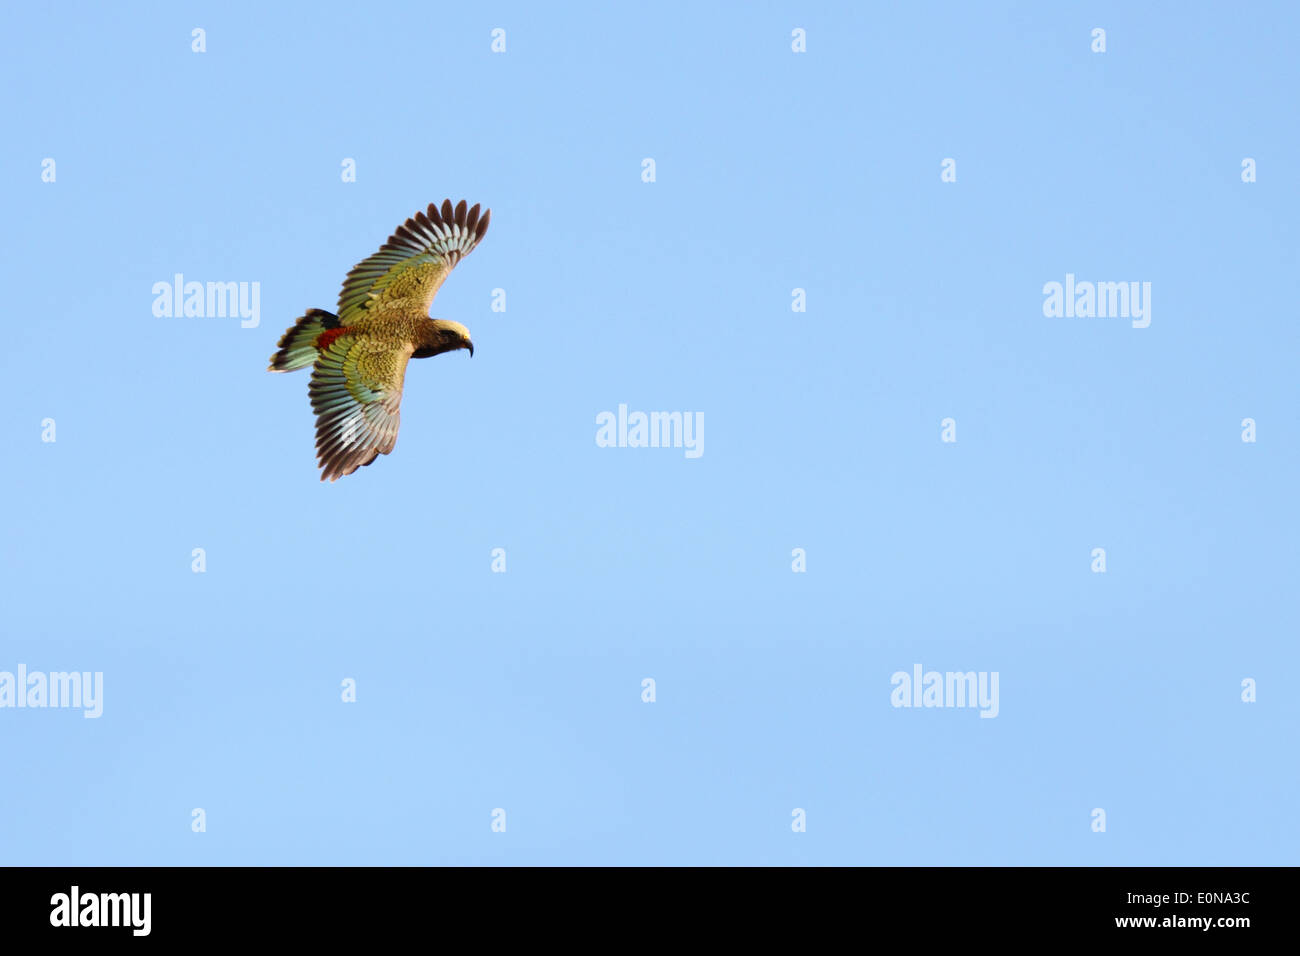 A Kea in colorful flight among mountain skies. Stock Photo